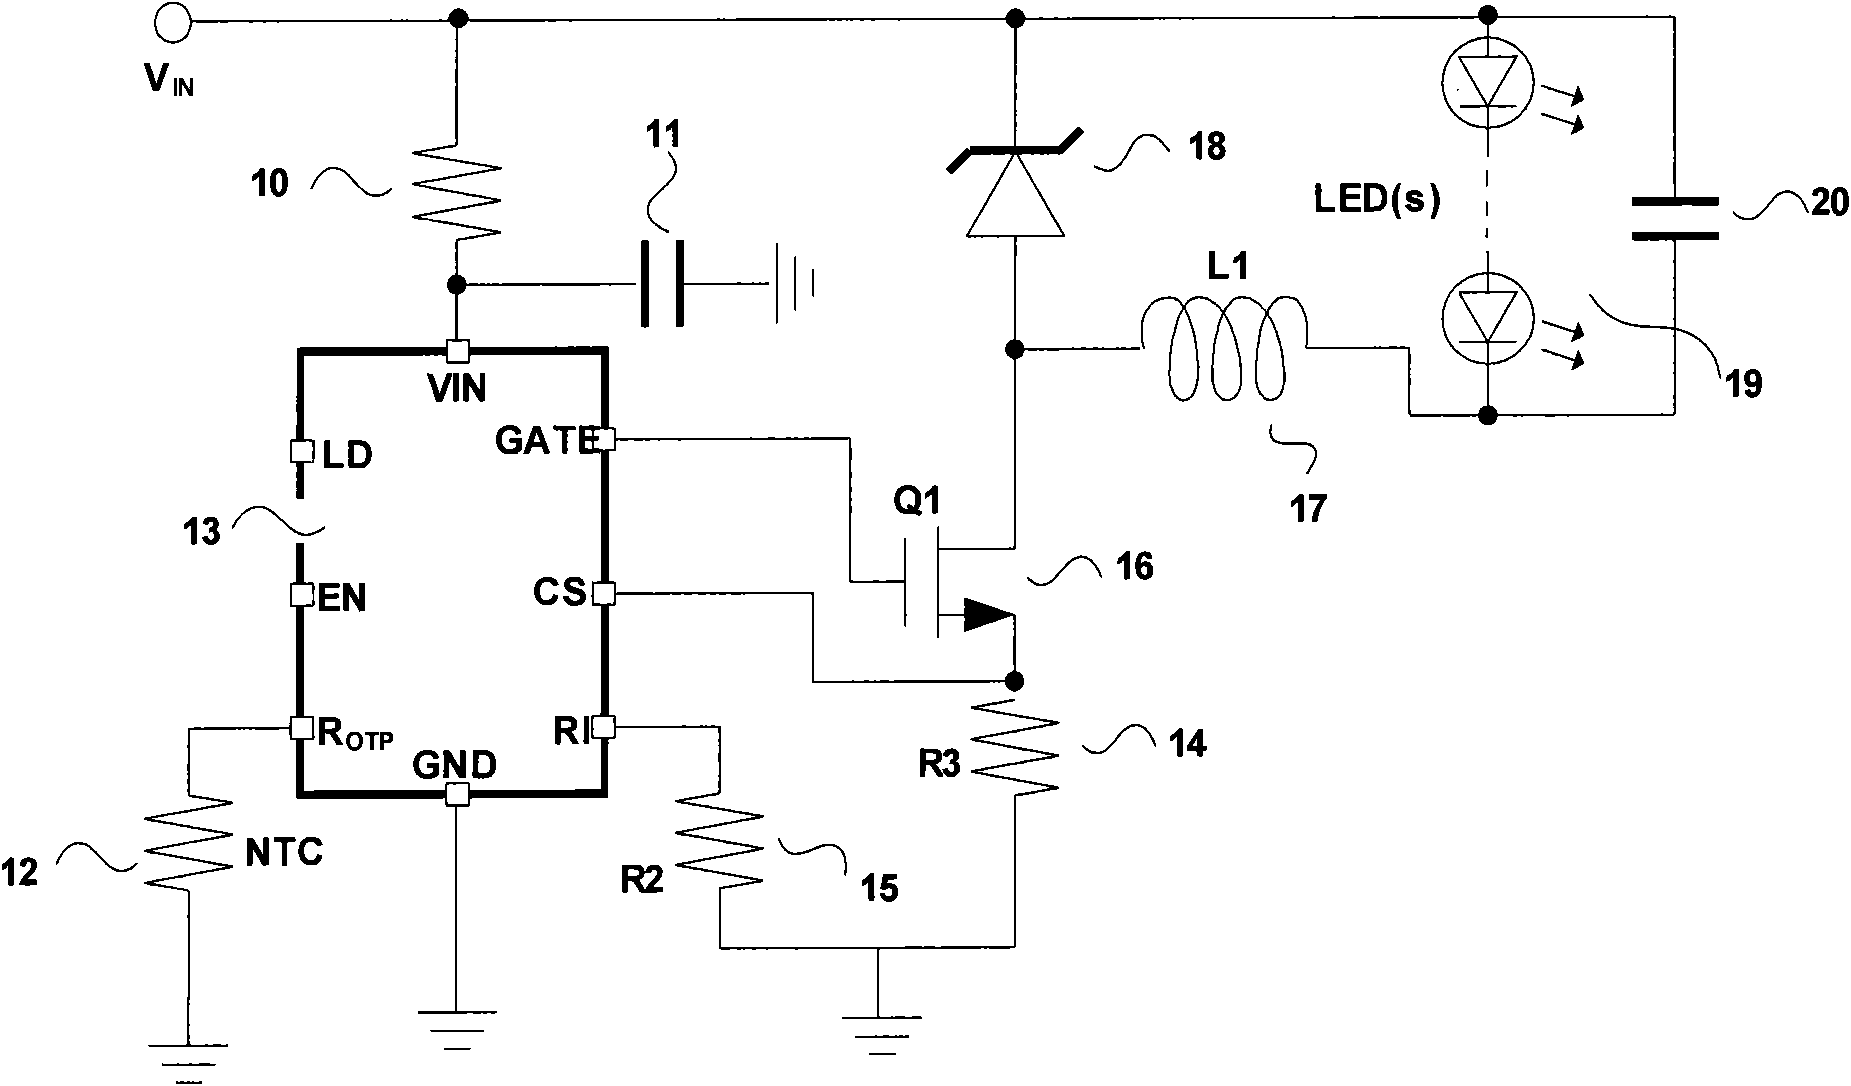 Non-isolated AC-DC (Alternating Current-Direct Current) LED driver current compensation circuit